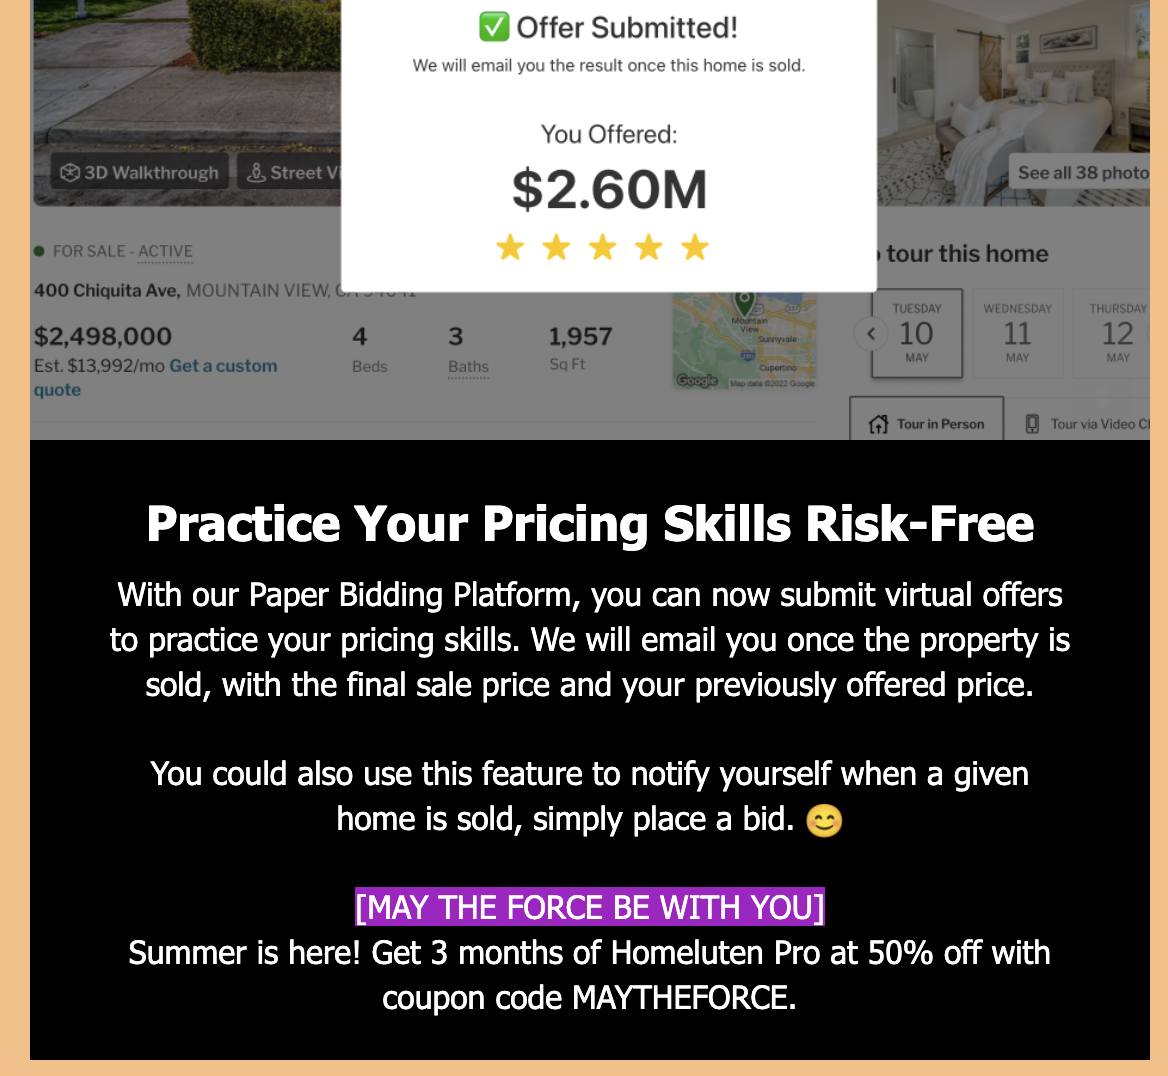 Homeluten Redfin Zillow Realtor Real Estate Supercharged 50% off for 3 months - $3.49/month; works also on annual sub $34.99/year